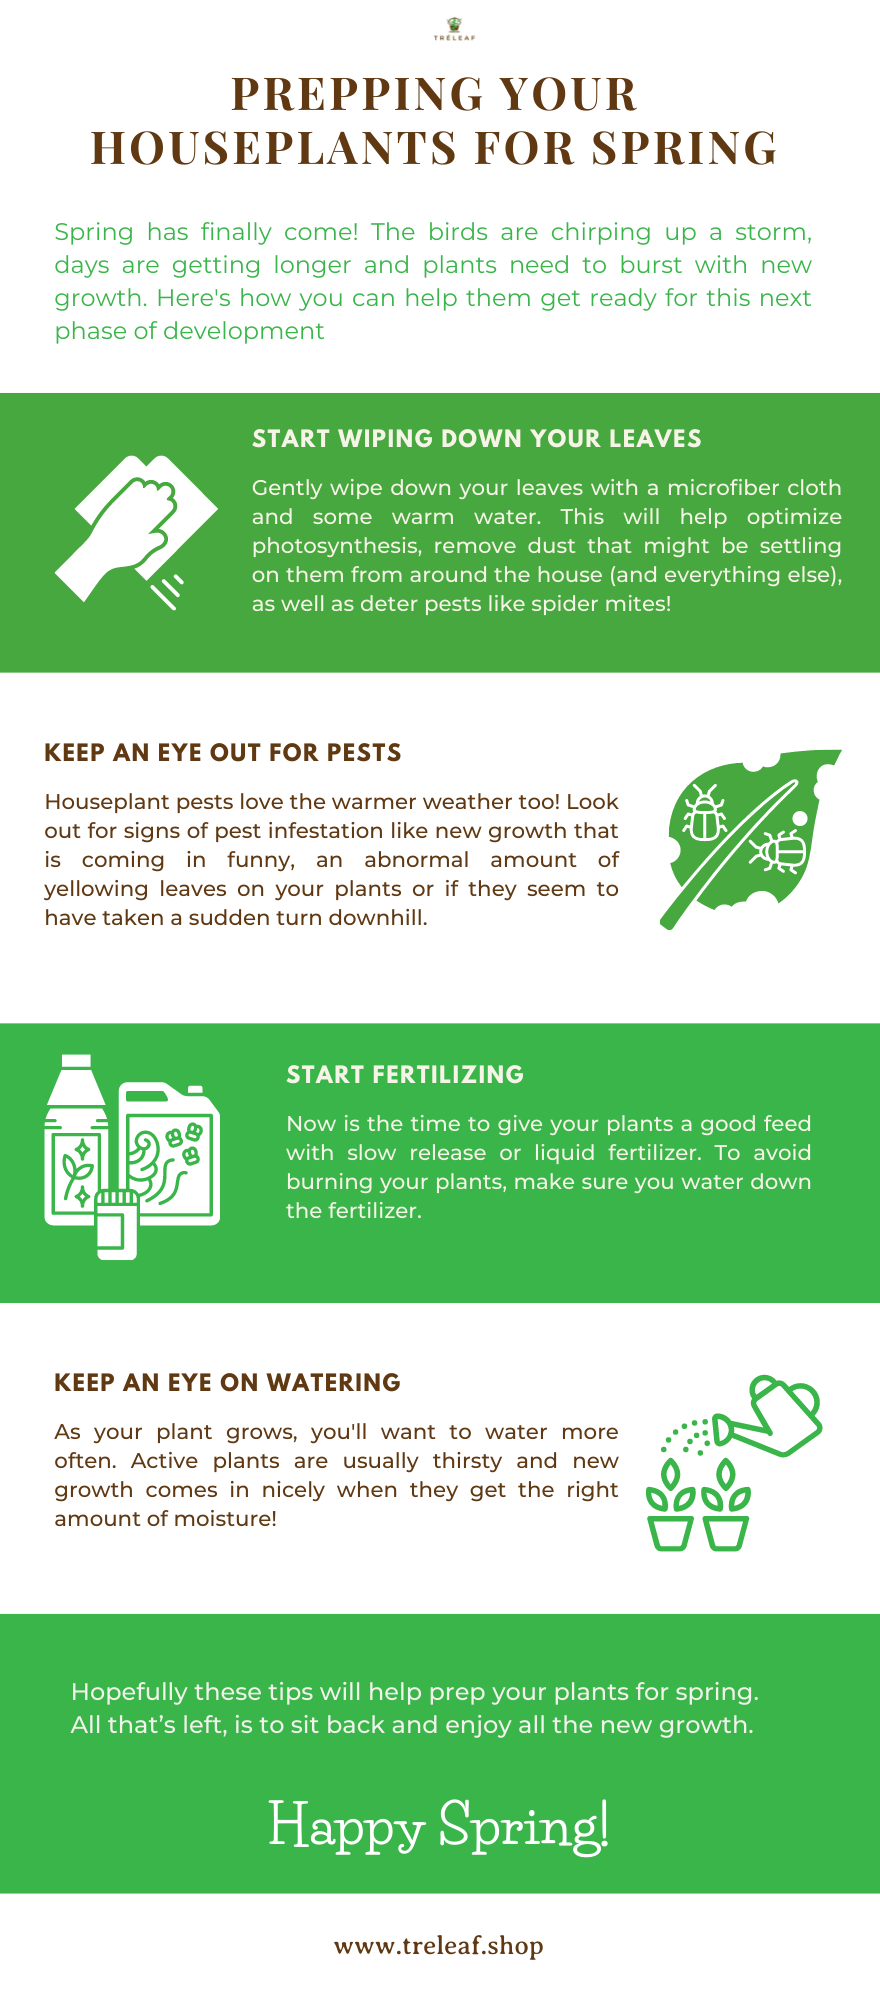 infographic containing tips on how to prepare your houseplants for the spring growing season